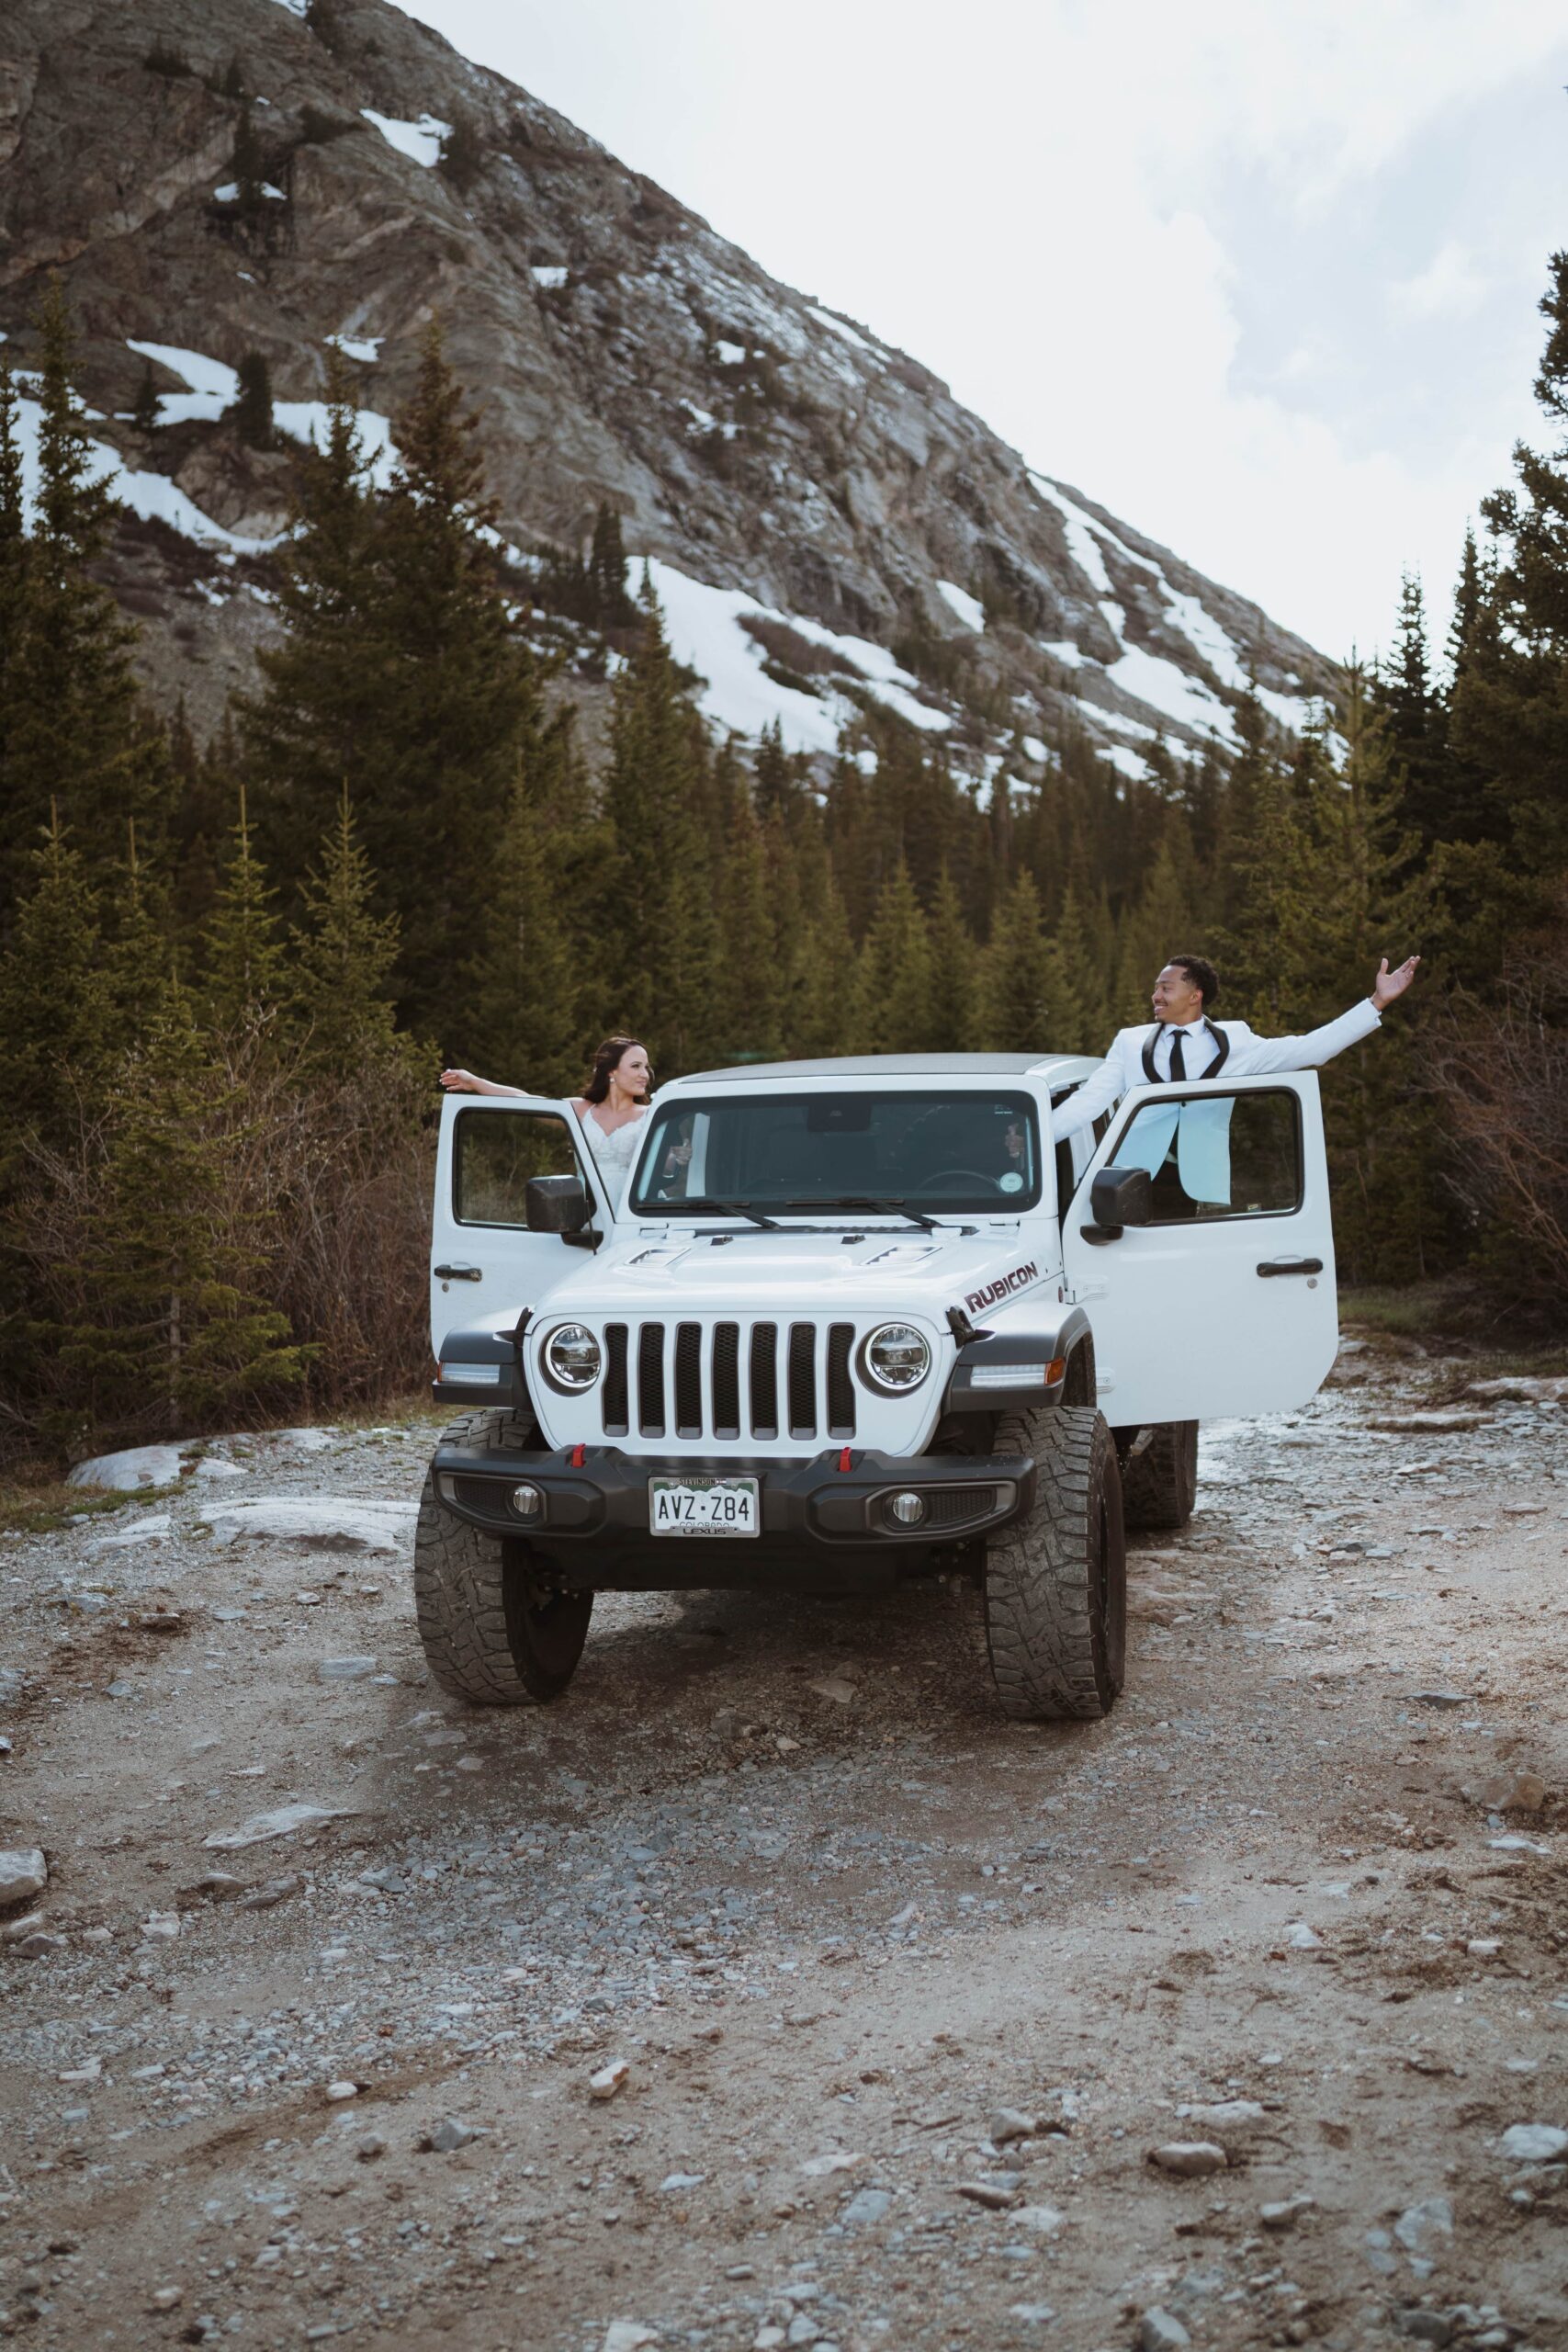 eloping in breckenridge colorado in the spring. off roading in jeeps to waterfalls and alpine lakes.